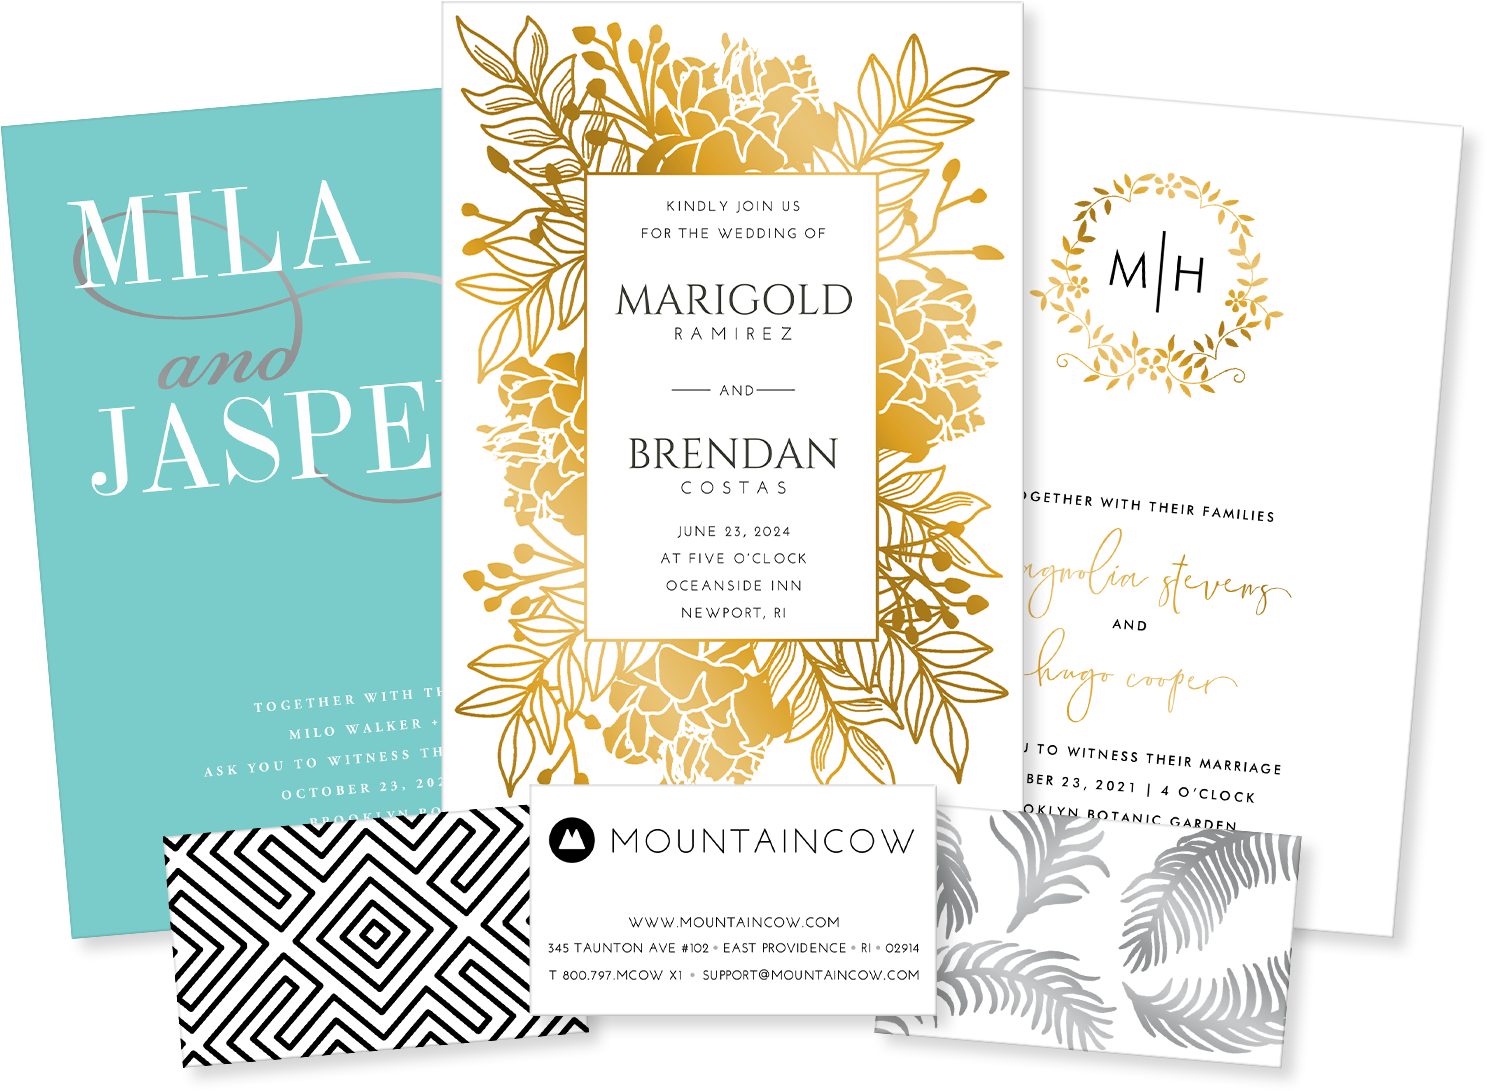 Mountaincow Stationery Sample Packs